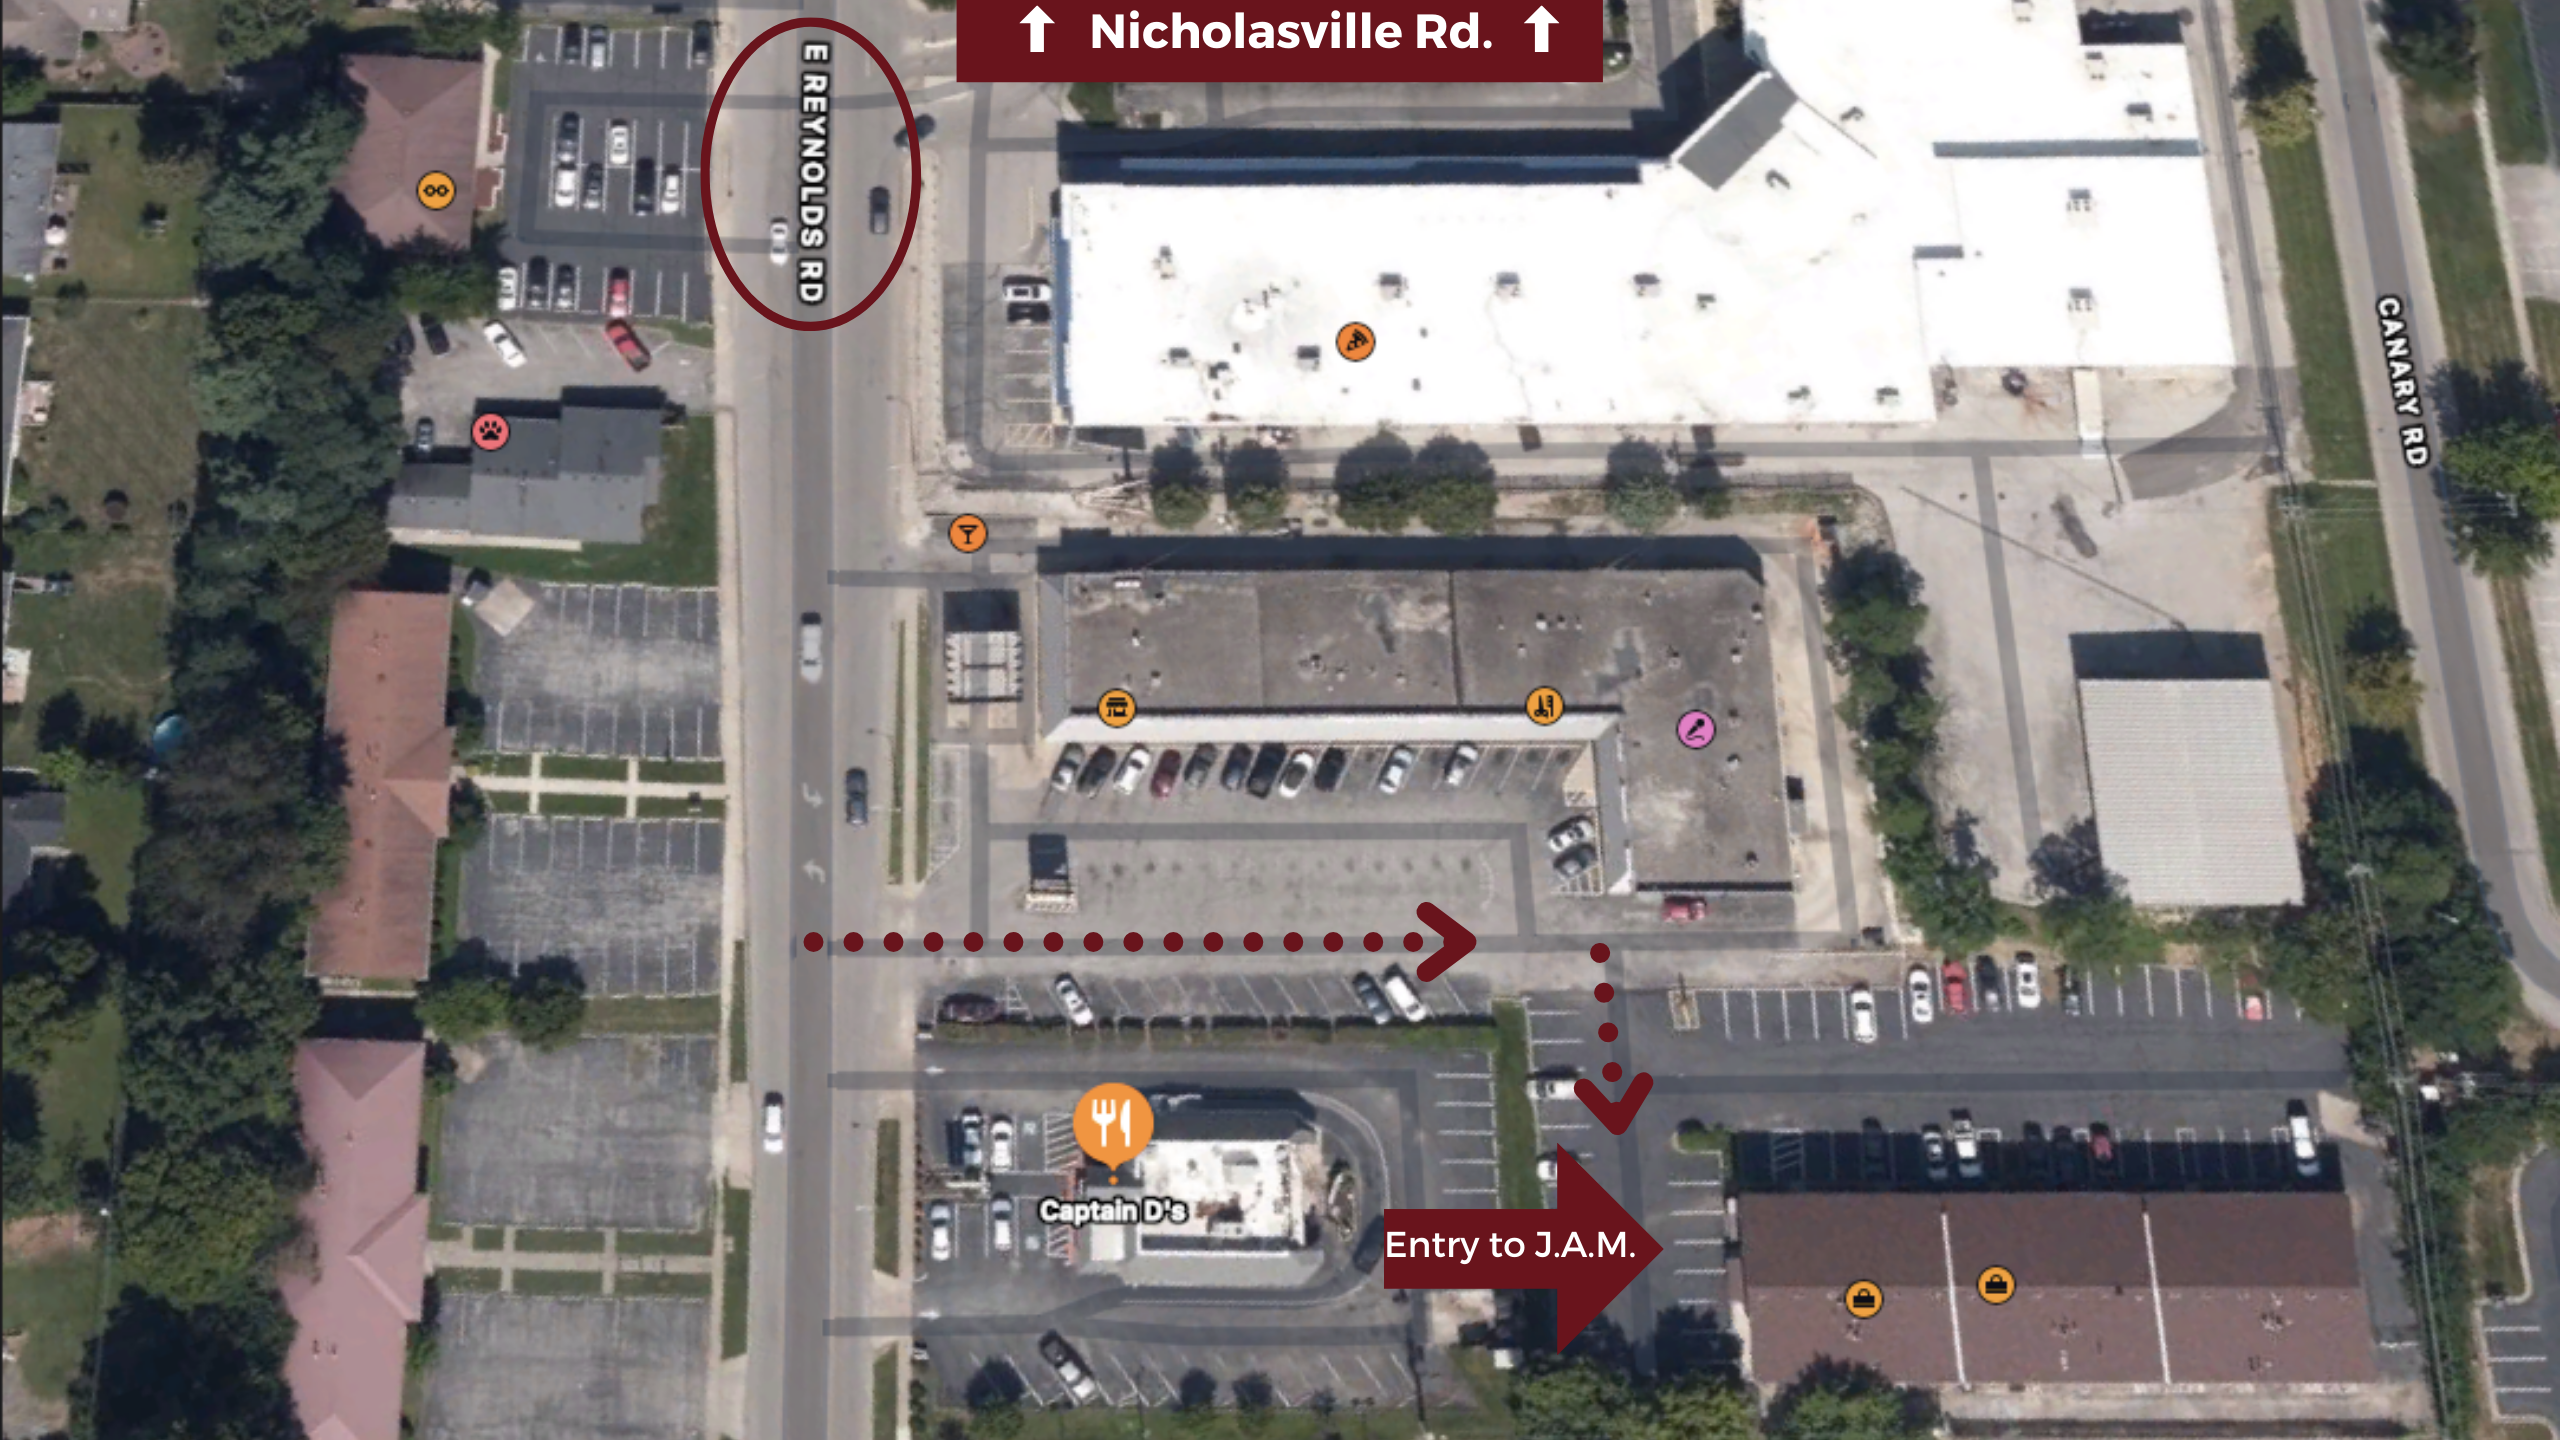 Map from Nicholasville Rd.